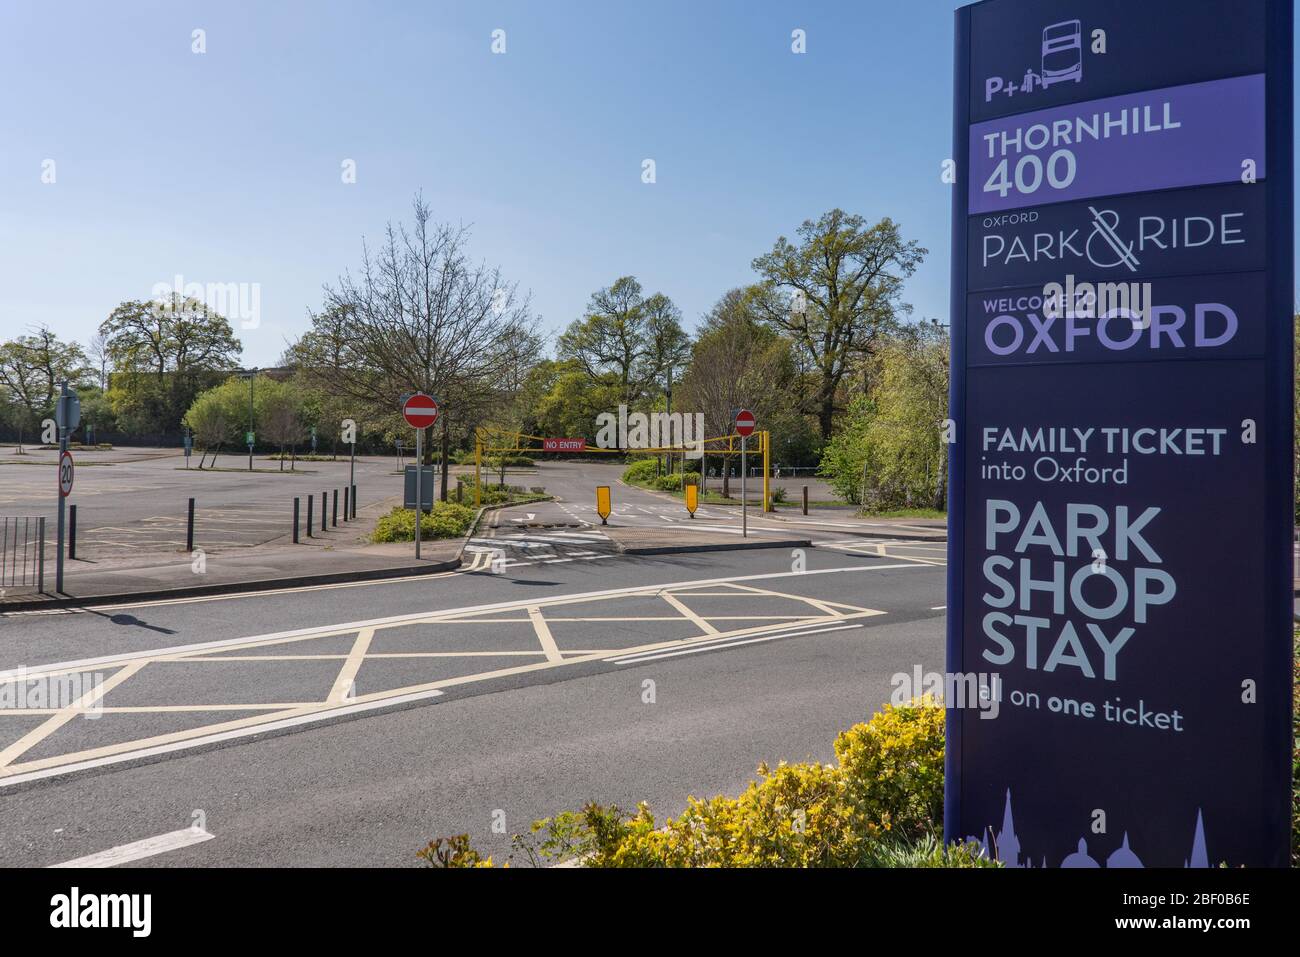 A deserted park and ride car park in Oxford during the coronavirus (Covid-19) outbreak, April 2020. Stock Photo